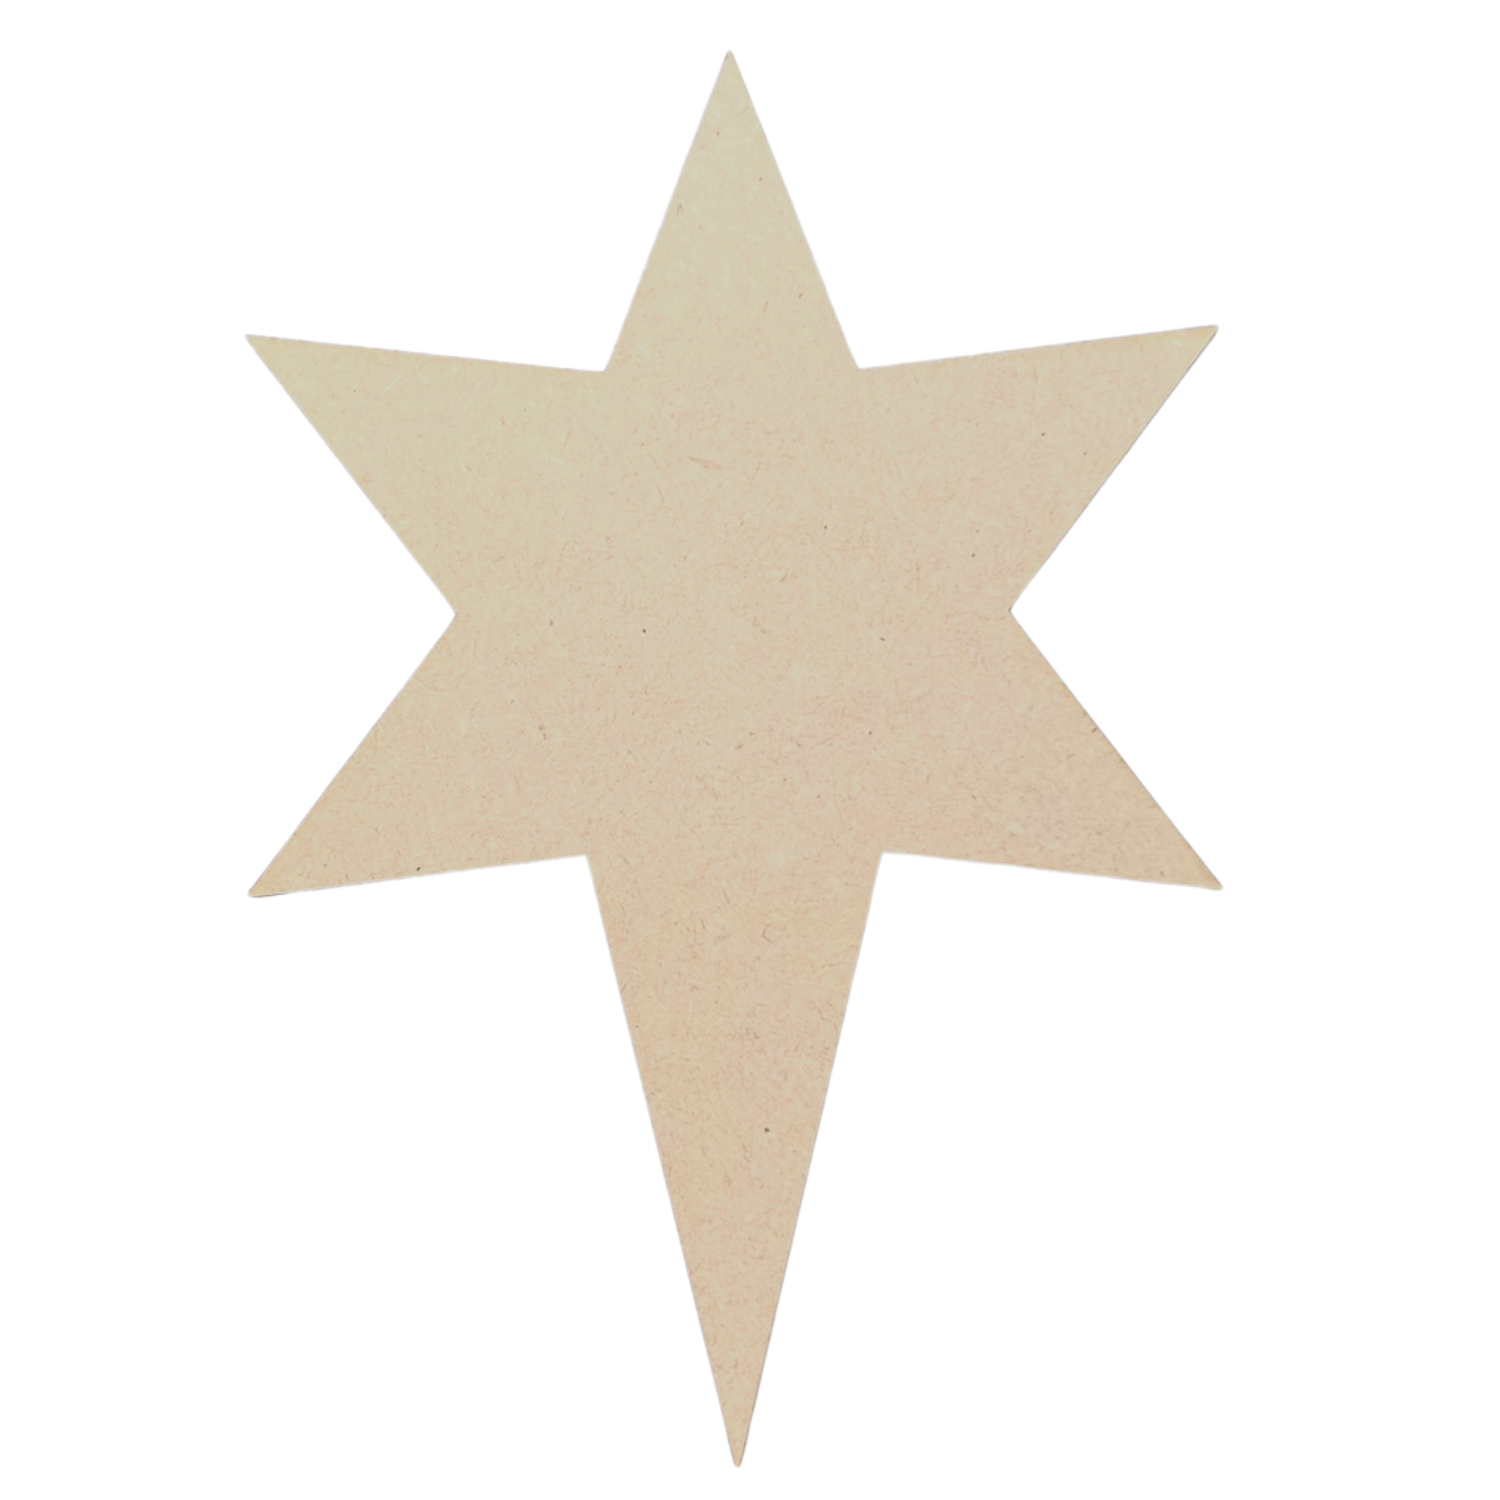 Krafty Supply Wood North Star/ Christmas Stars , 1/8" Thick MDF, Bulk Set of 10 Wood North Star/ Christmas Stars, Small, 3 inches - image 1 of 2